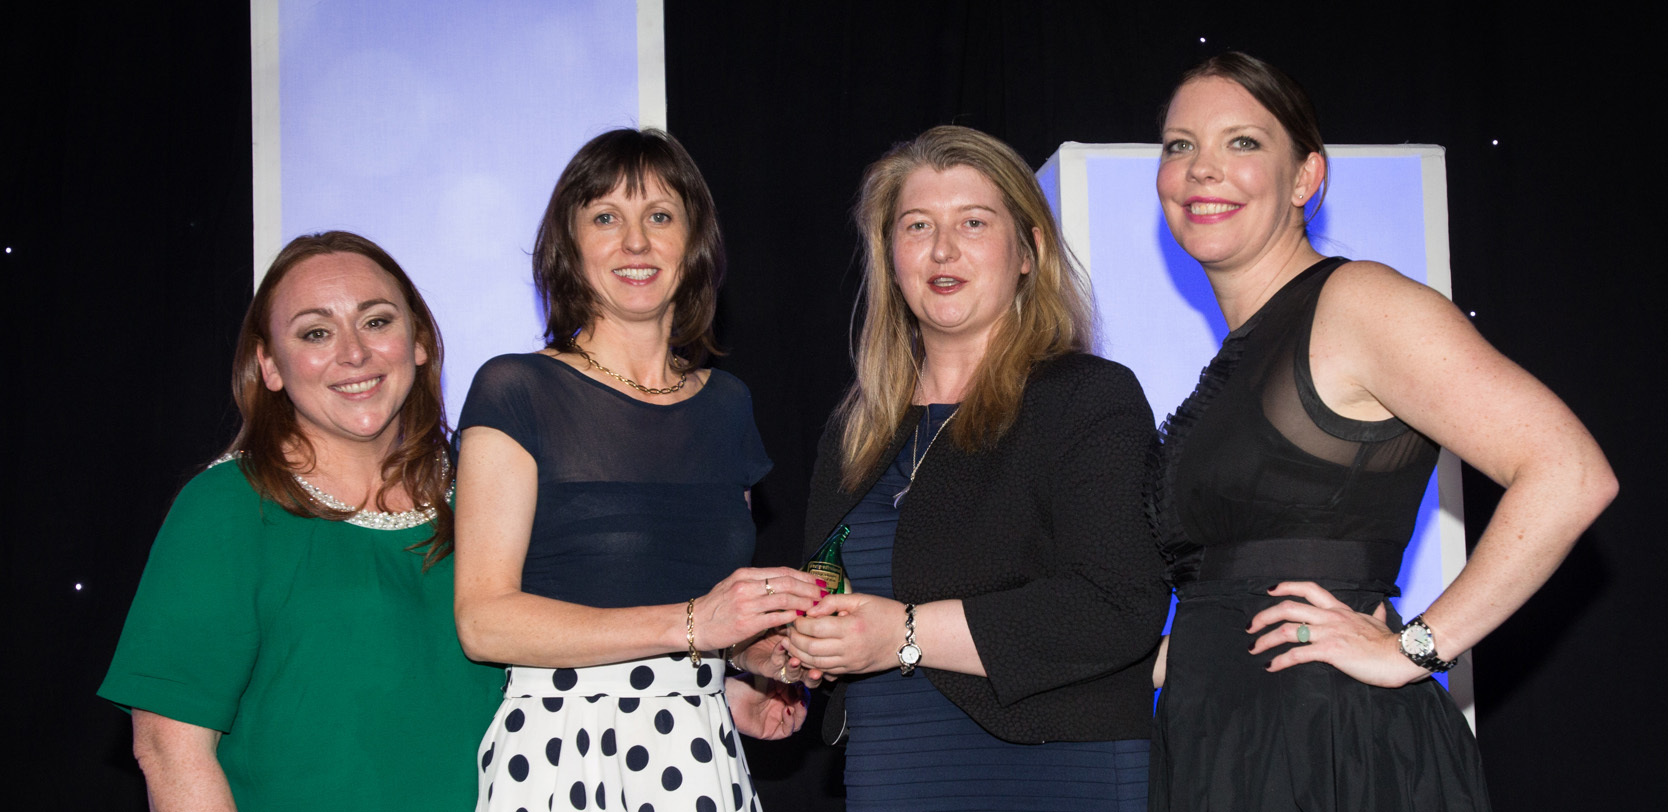 Double win for UCC at gradireland awards